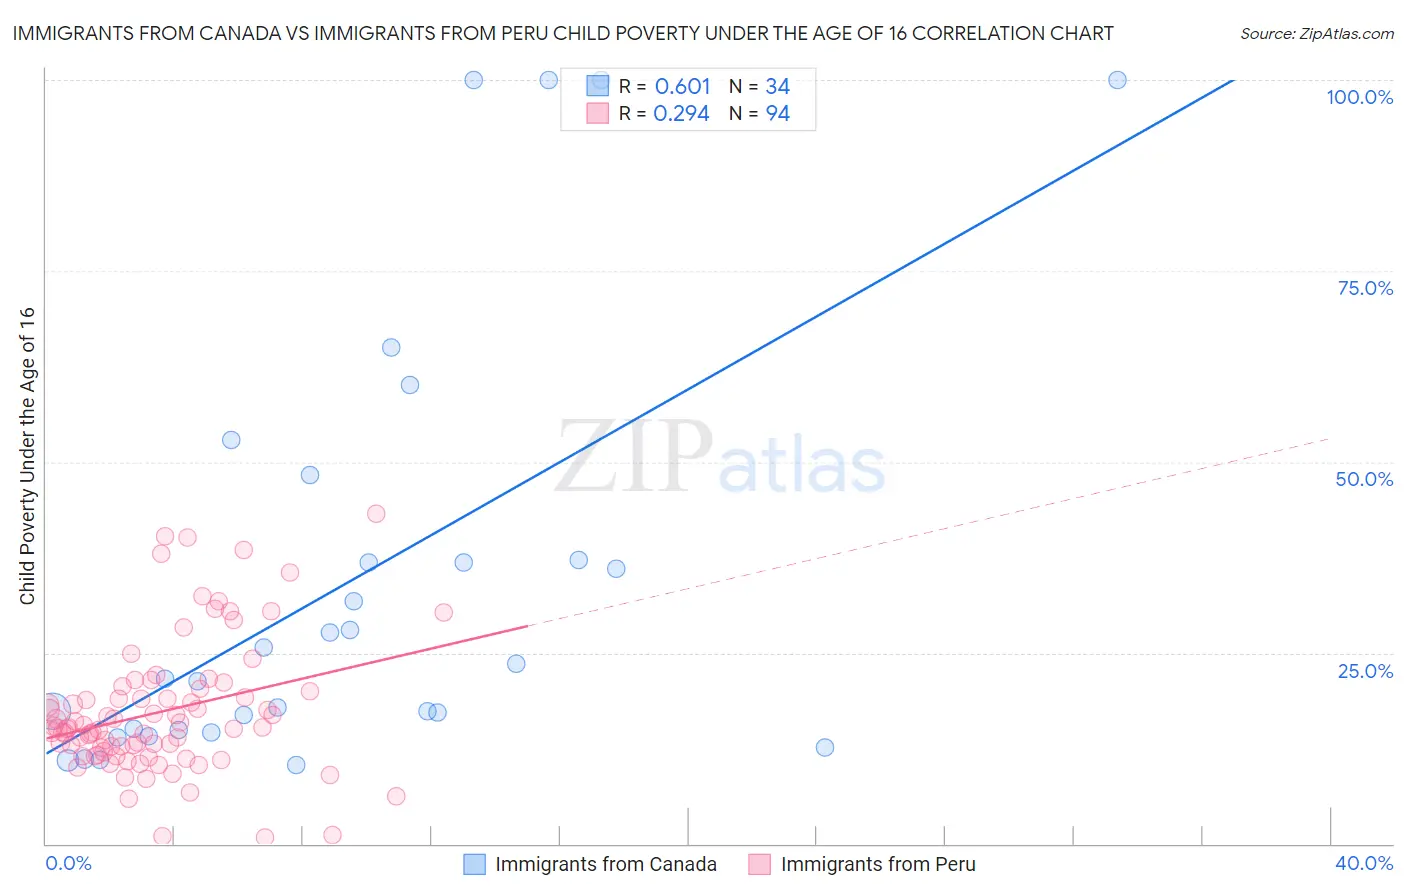 Immigrants from Canada vs Immigrants from Peru Child Poverty Under the Age of 16